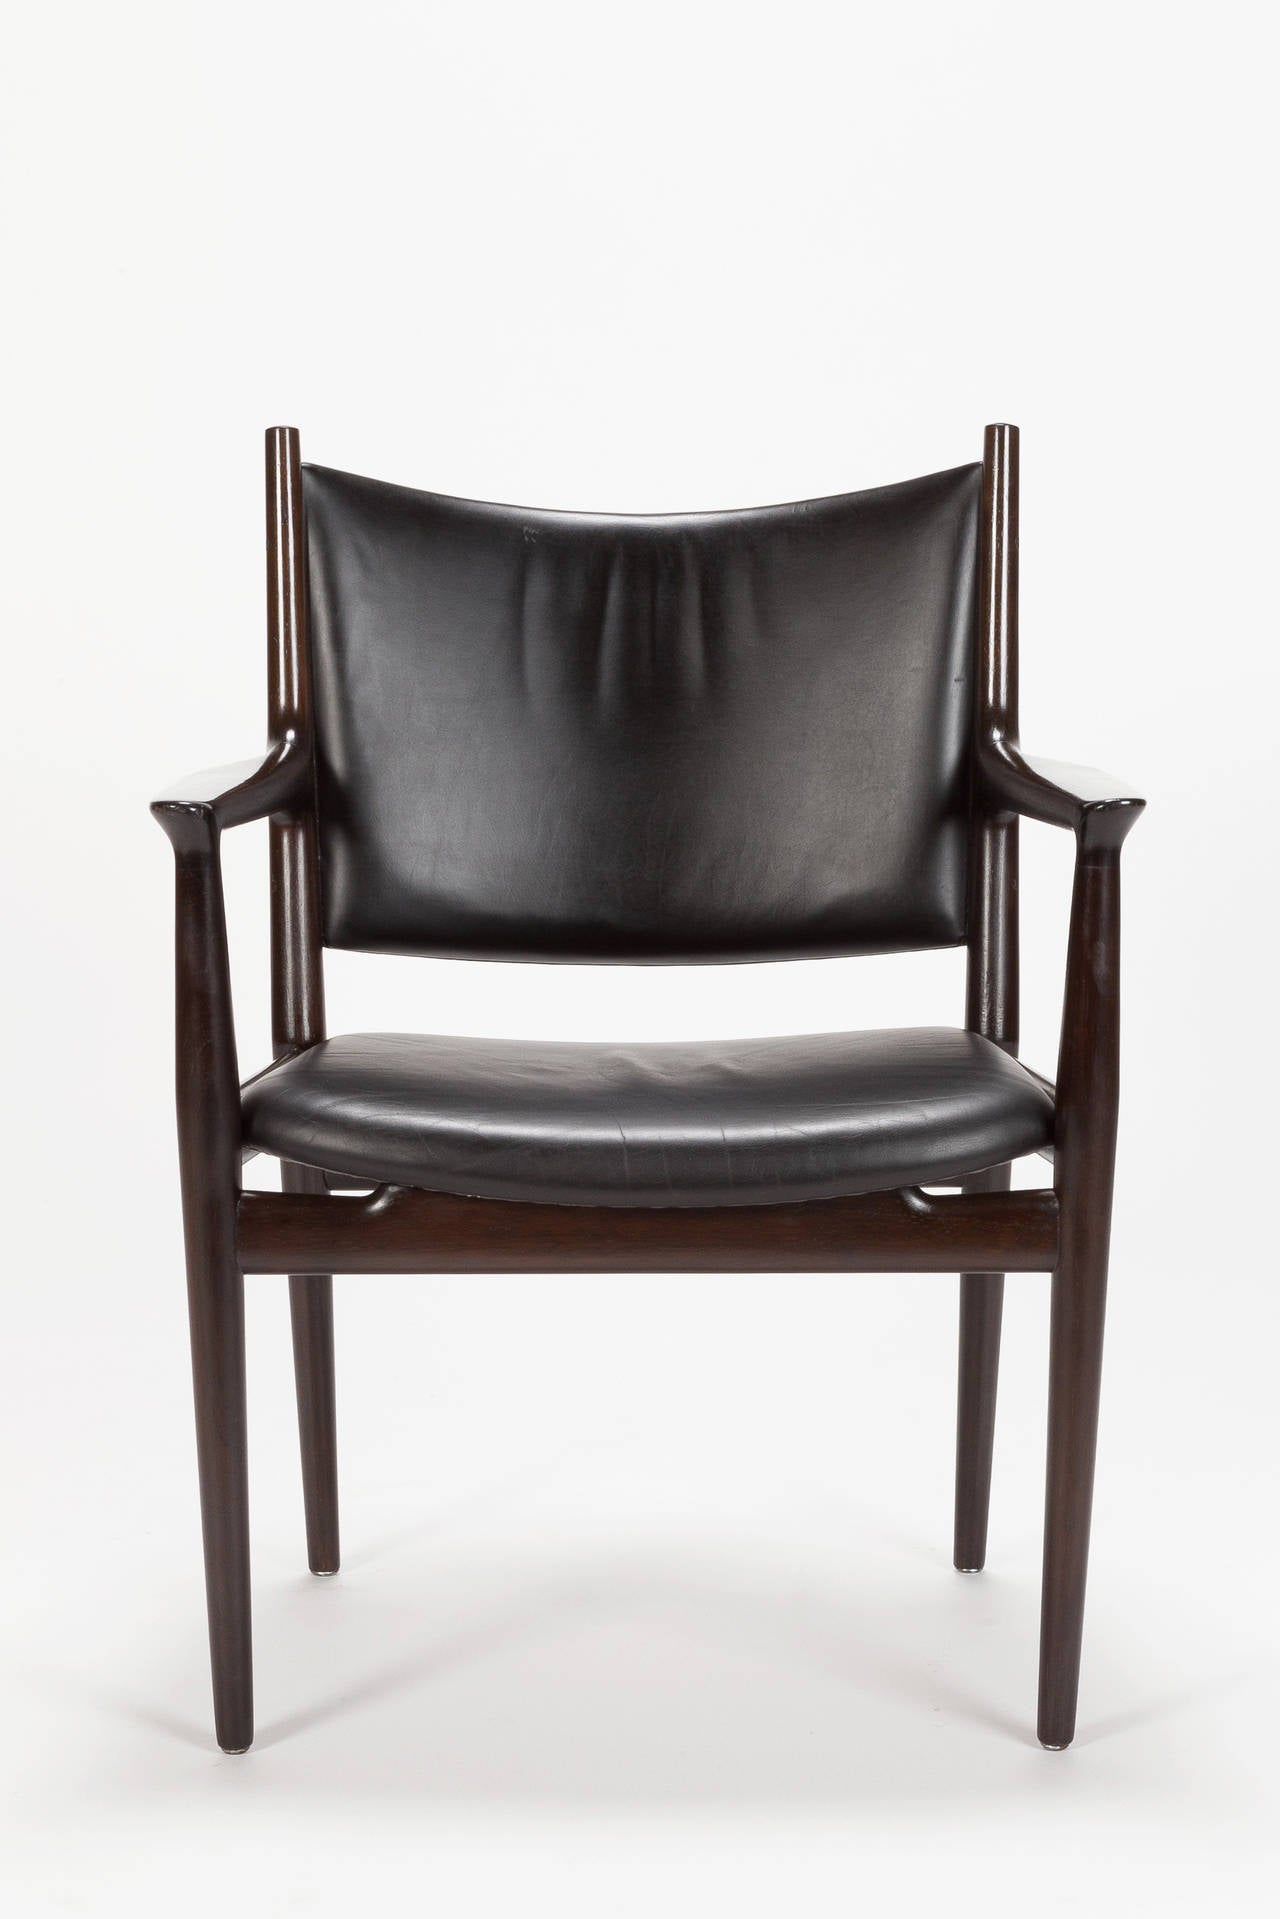 Stunning pair of Hans Wegner conference chairs JH-713 for Johannes Hansen, Denmark in the 1960s. The frame is made of dark Indian rosewood, covered with leather, very nice patina!